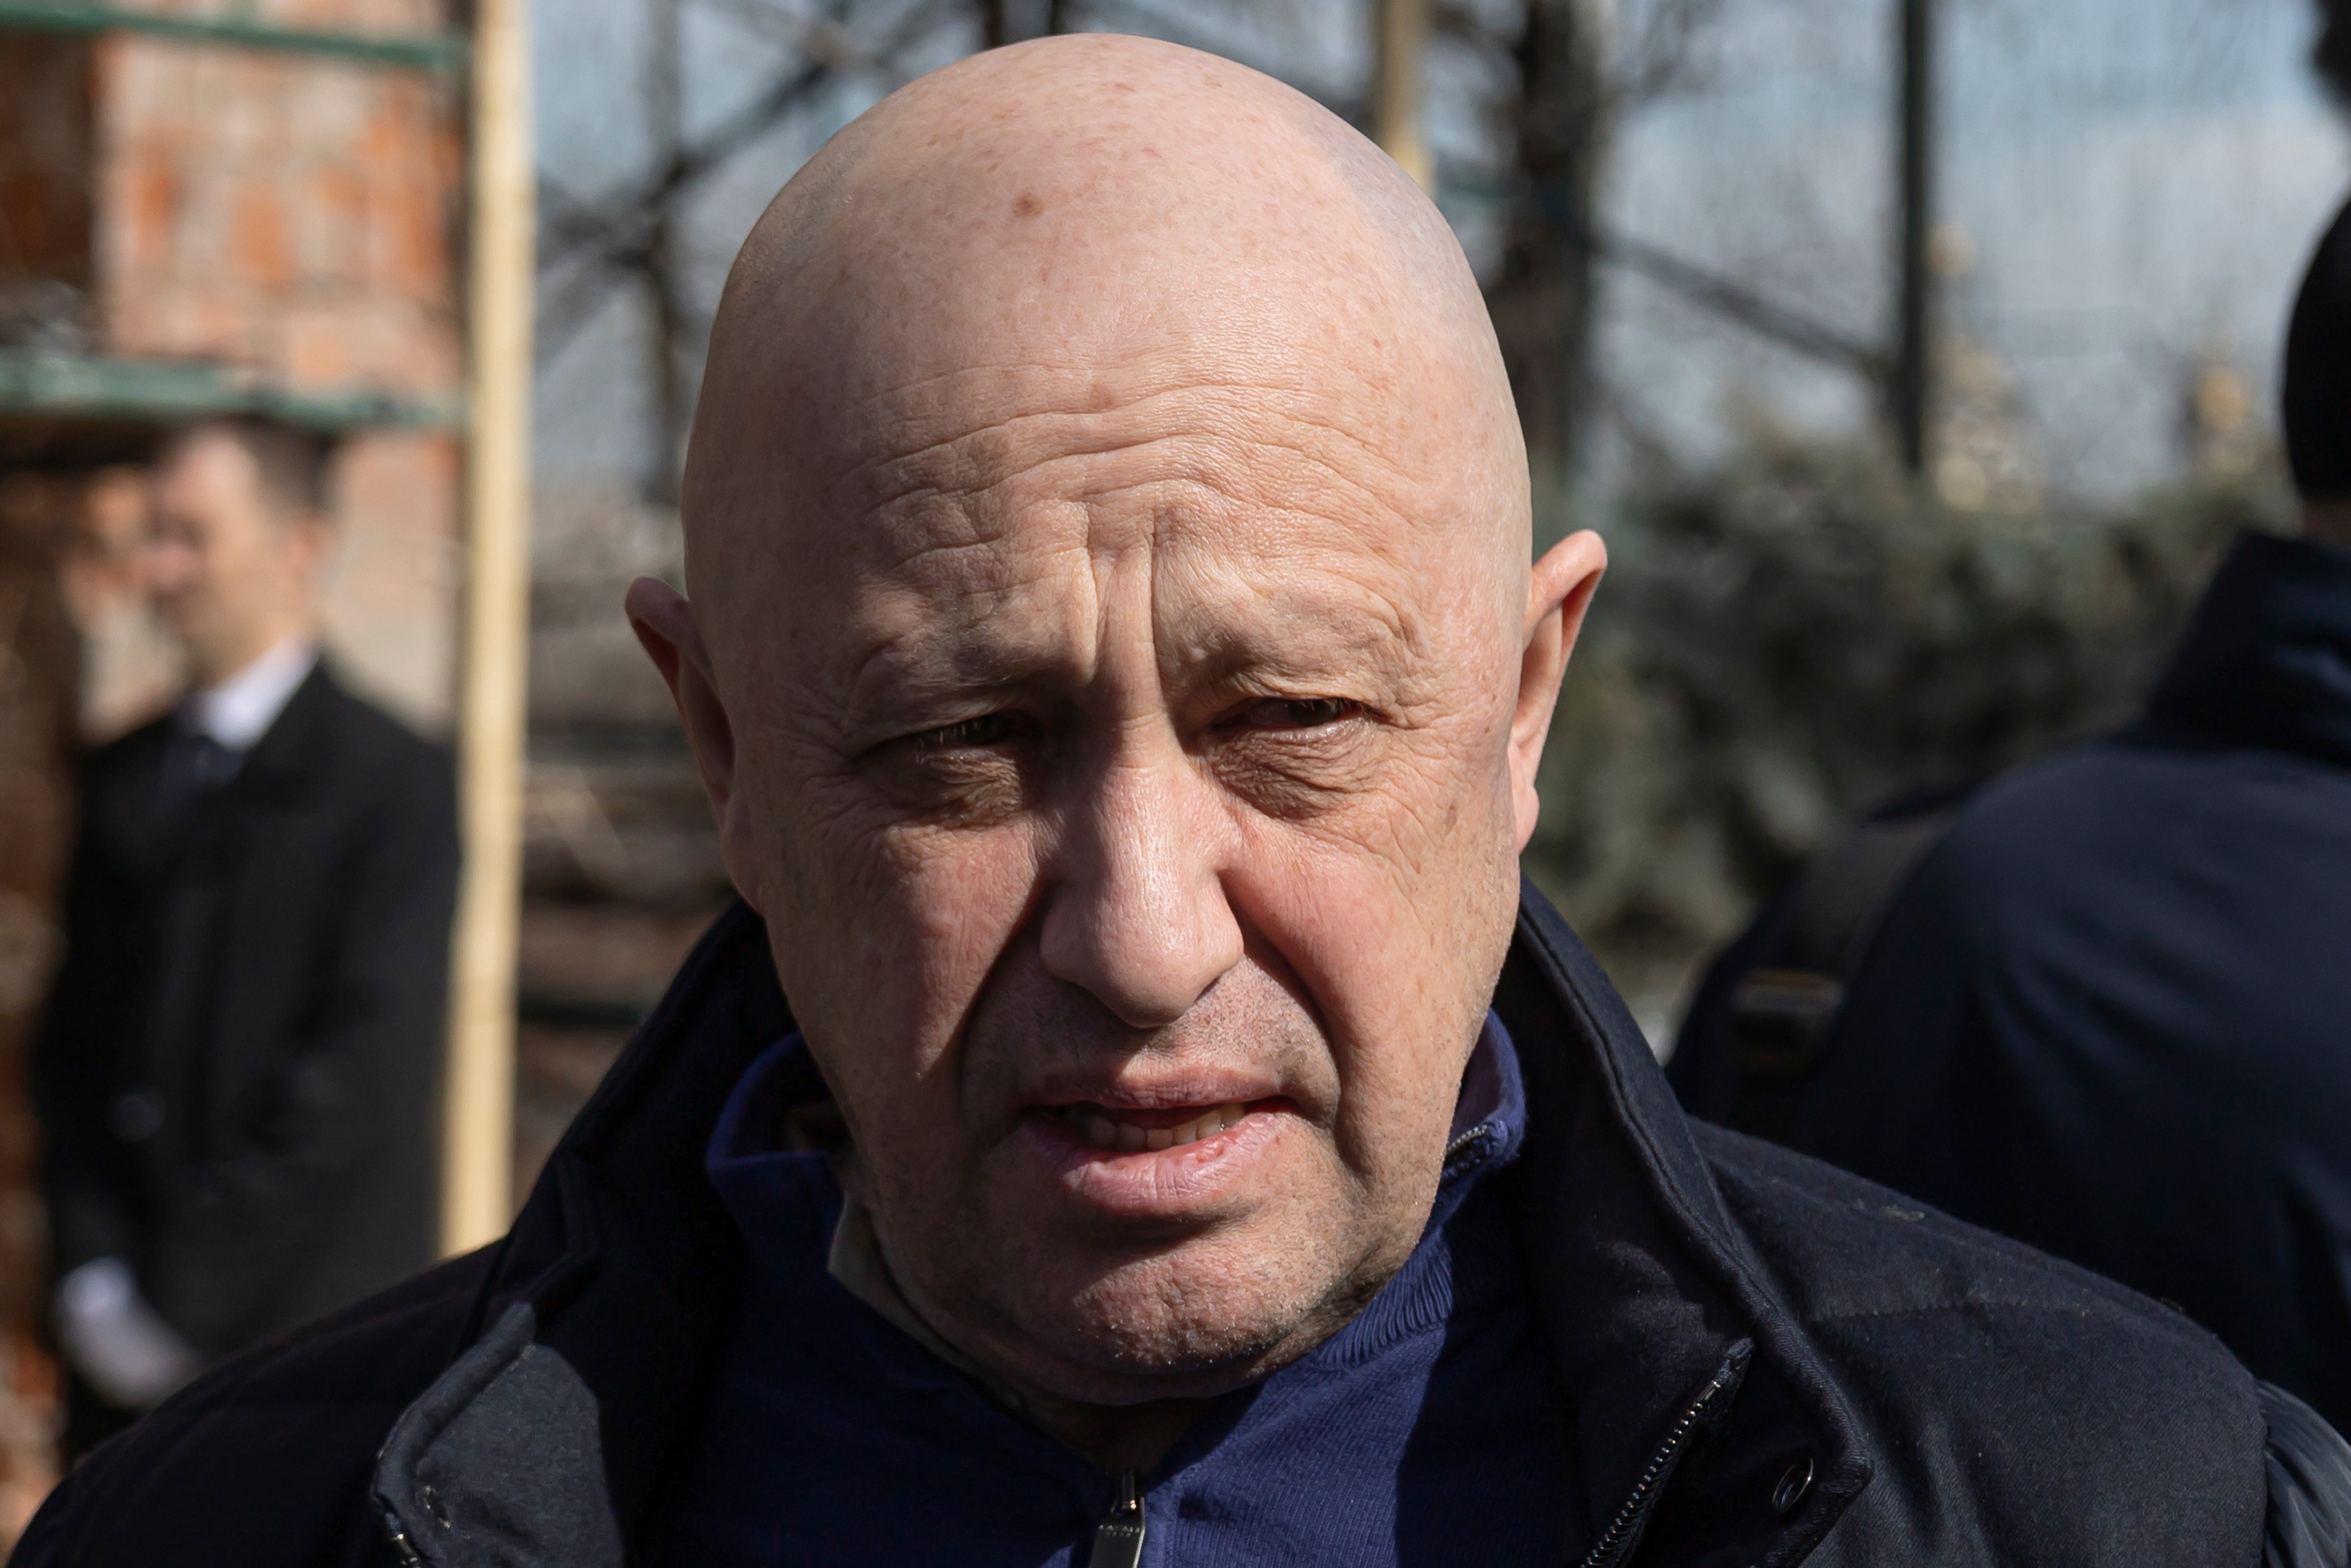 Yevgeny Prigozhin, the owner of the Wagner Group military company, arrives during a funeral ceremony at the Troyekurovskoye cemetery in Moscow, Russia, on 8 April 2023